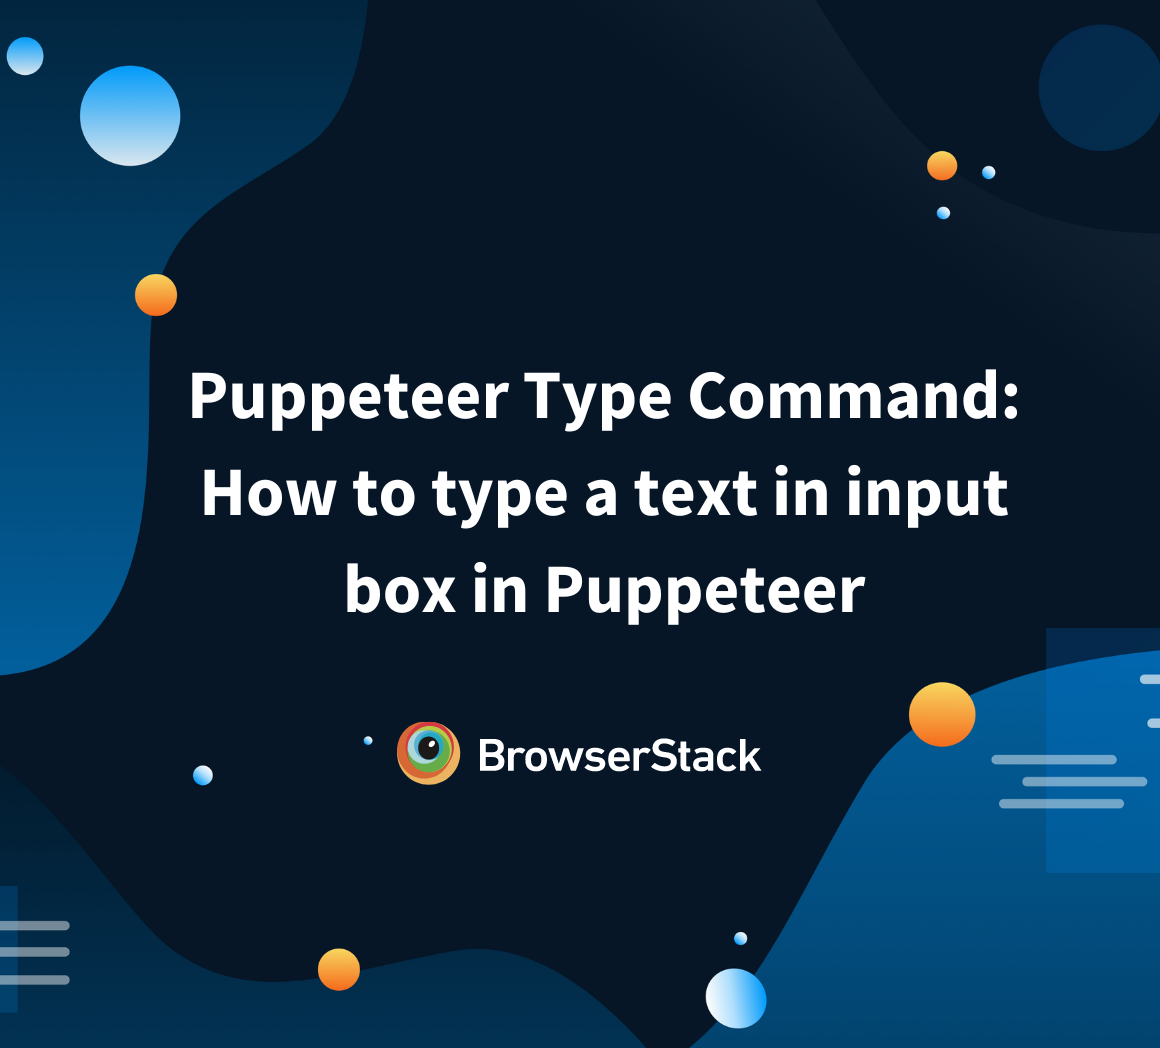 Puppeteer Type Command How to type a text in input box in Puppeteer